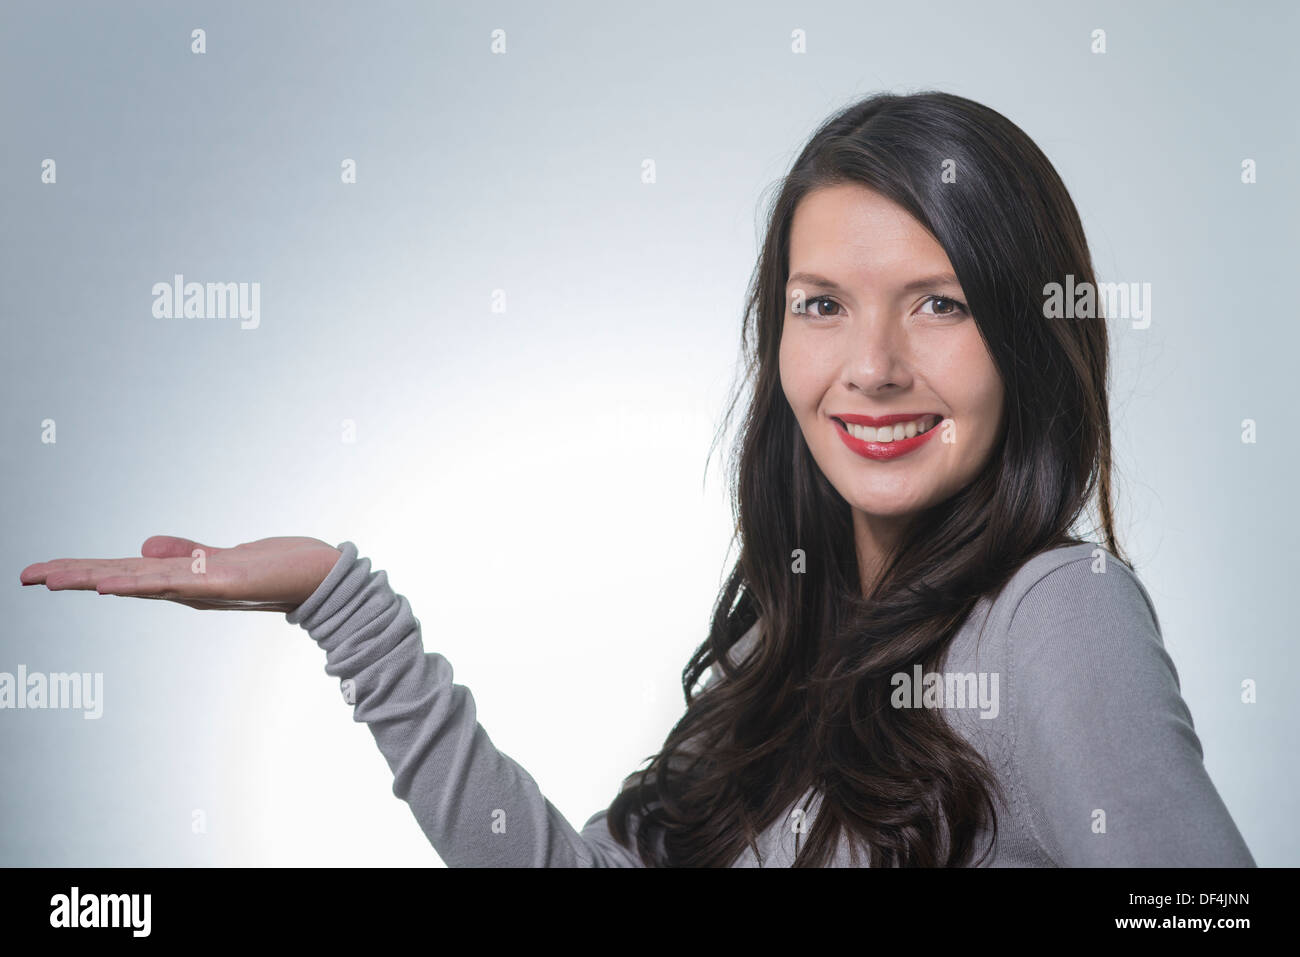 Beautiful young woman with a lovely friendly smile standing with an outstretched empty palm for your product placement pointing Stock Photo